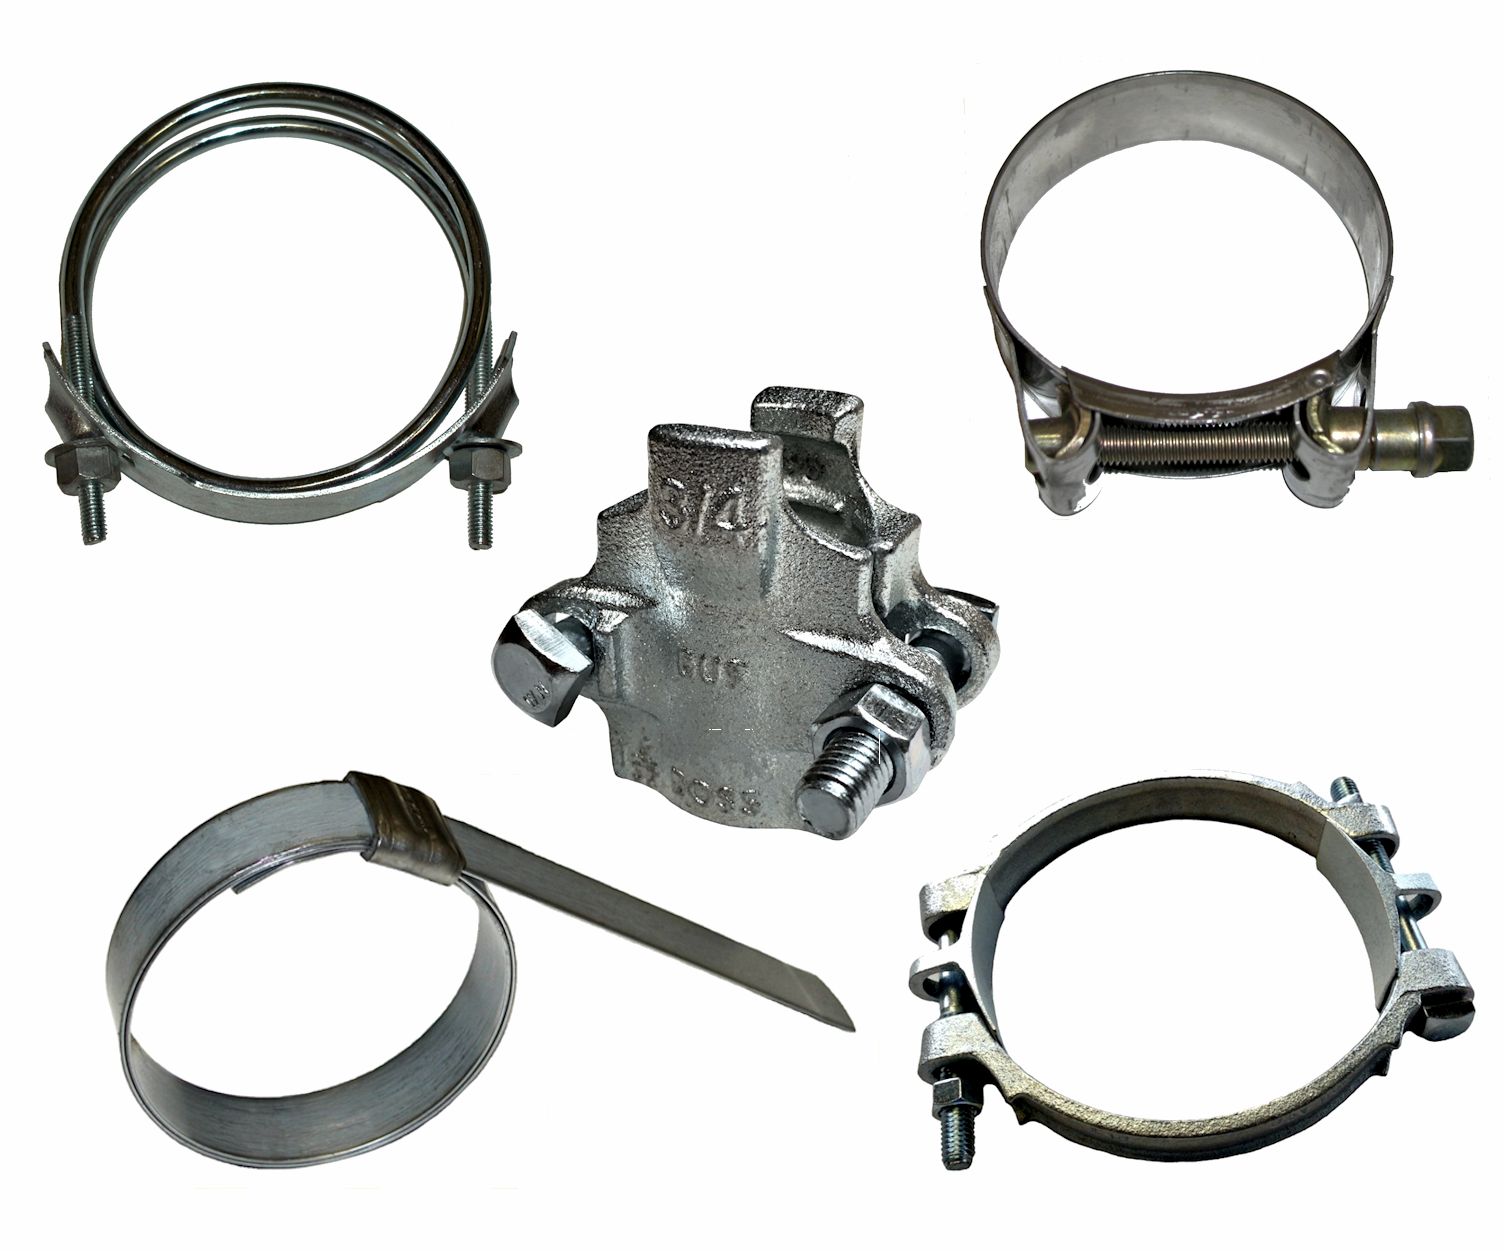 Hose Clamps and Tools - Capital Rubber Corp